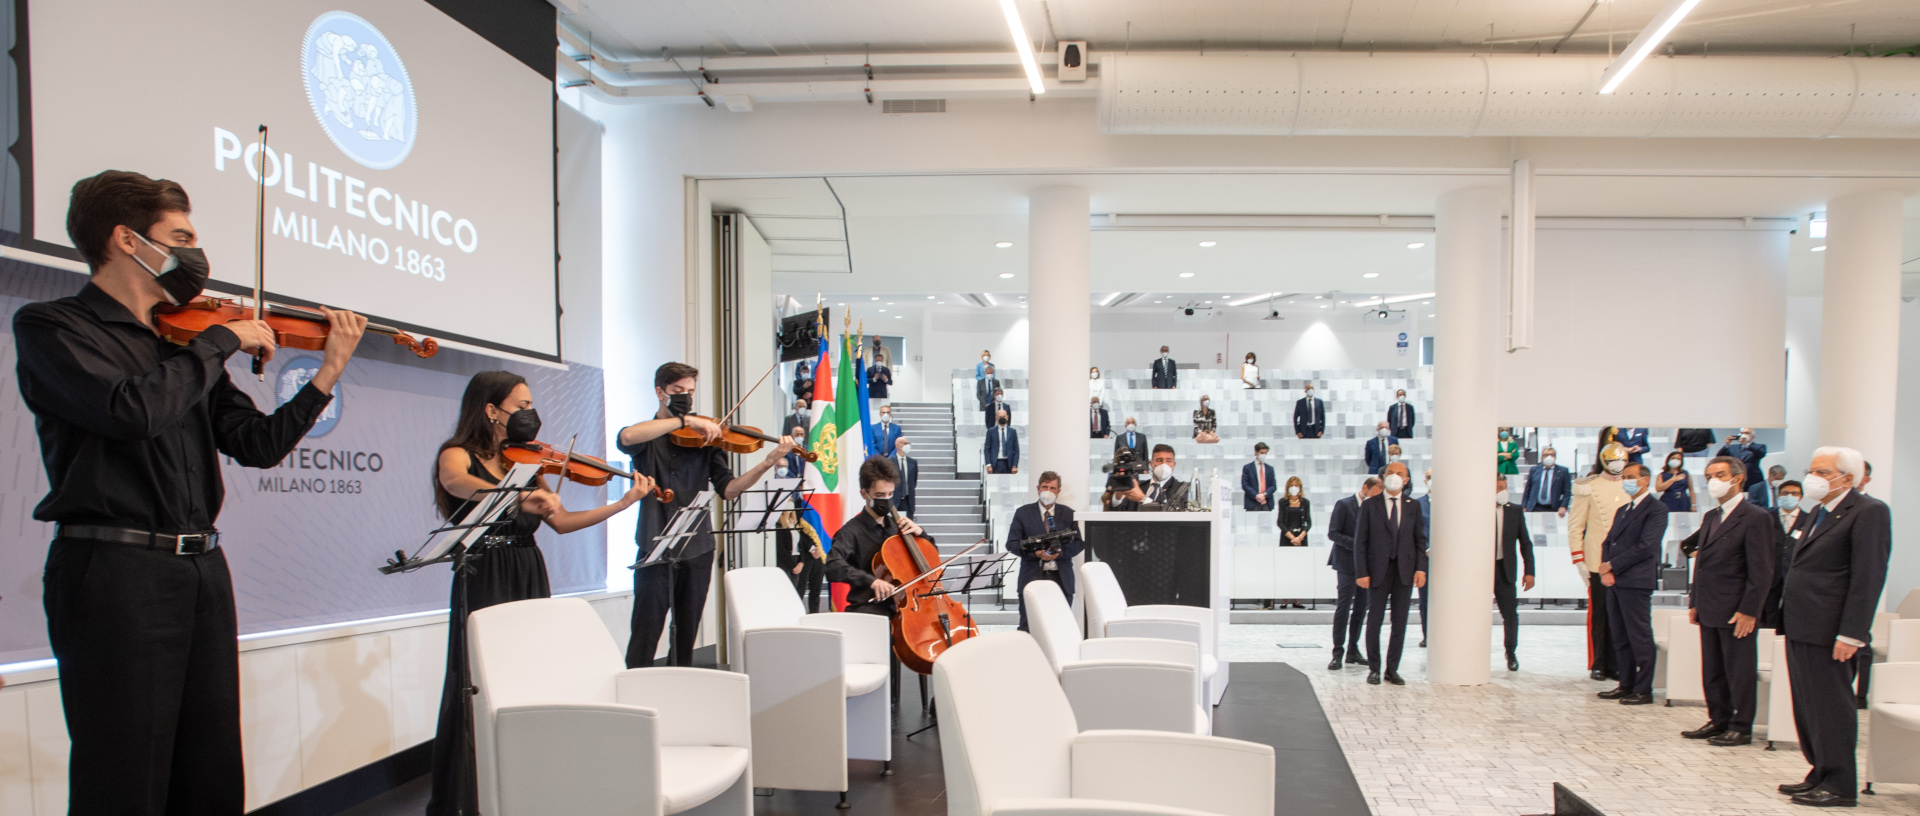 The string concert for the inauguration of the new Architecture Campus